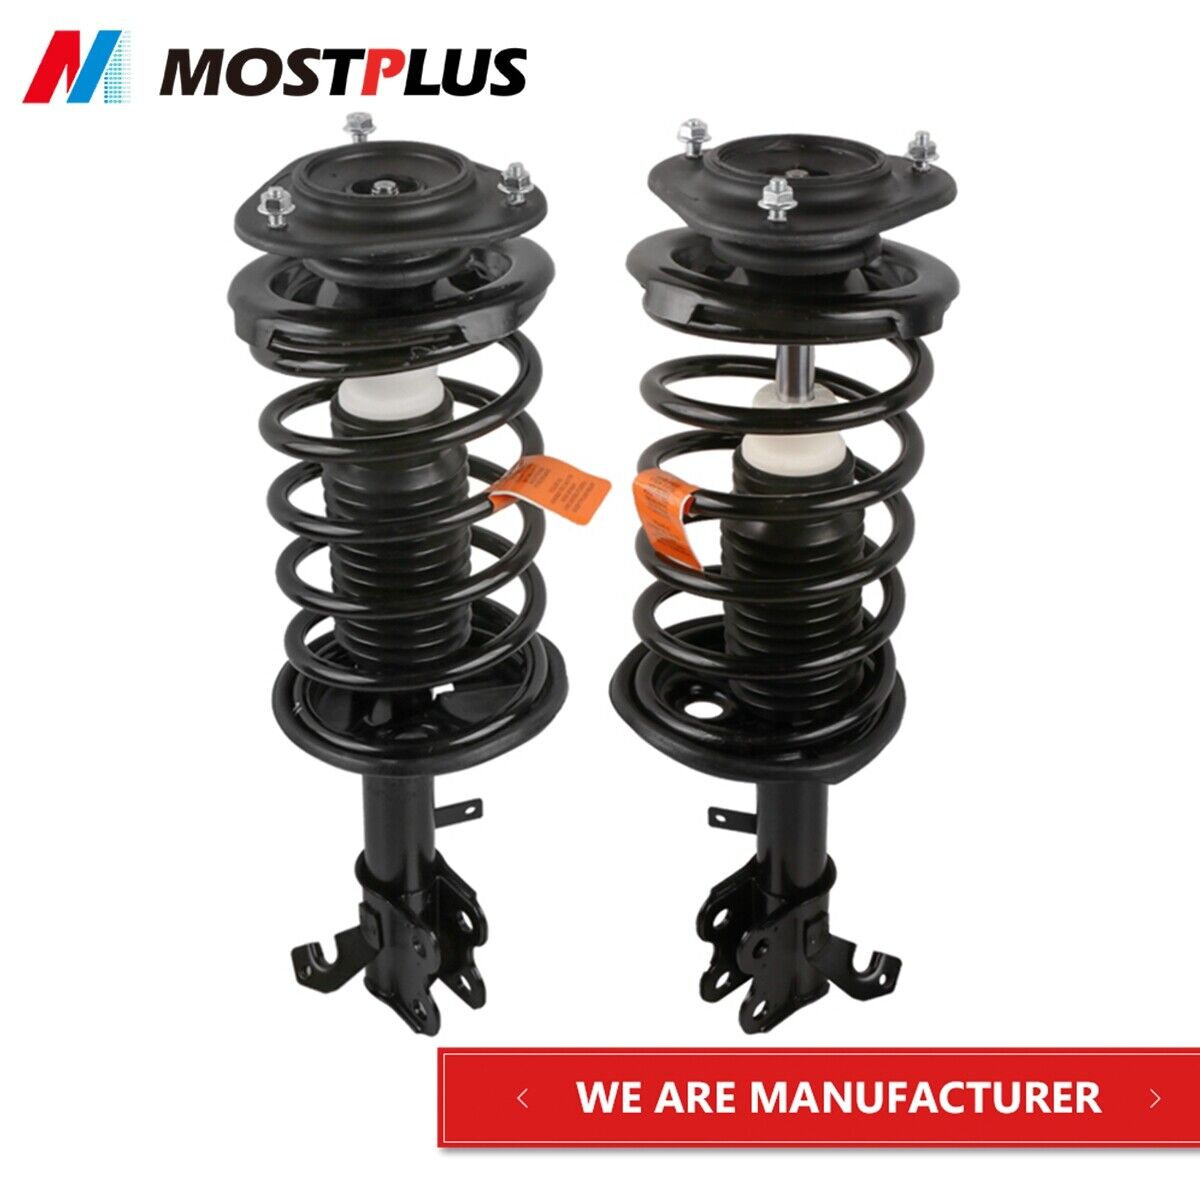 2PCS Front Complete Shock Struts w/ Coil Springs For 1993-2002 Toyota Corolla